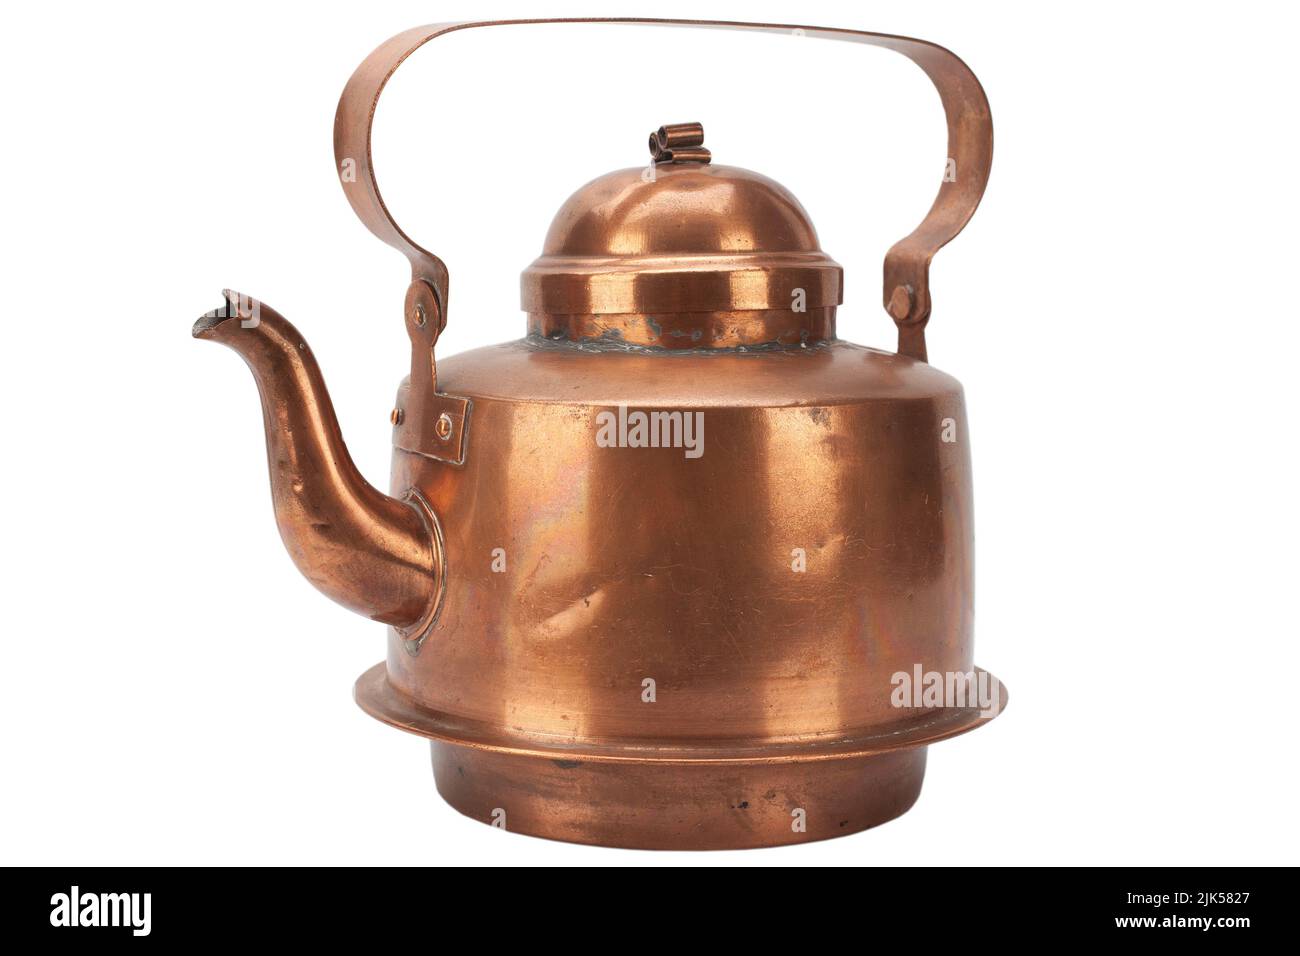 Vintage antique copper teapot isolated on white background Stock Photo